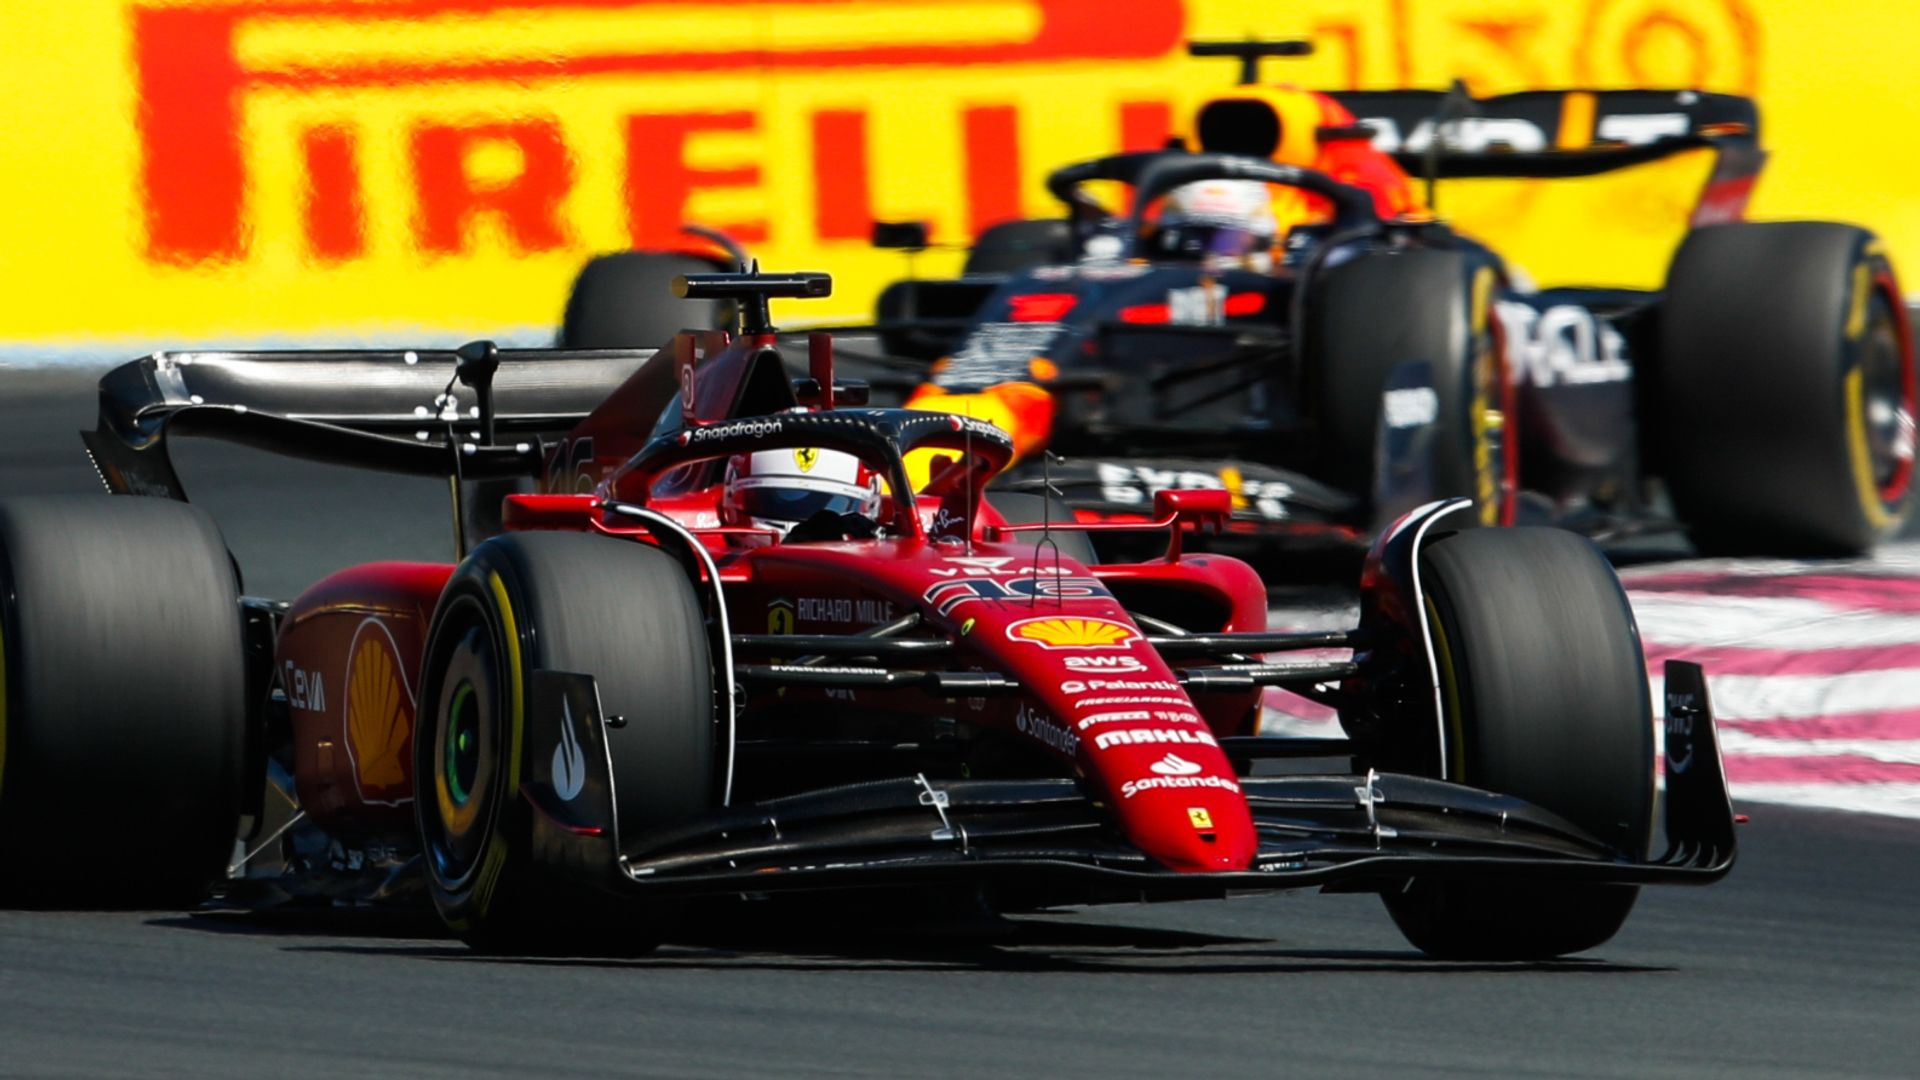 Ferrari unhappy with 'very insignificant' Red Bull cost cap punishment